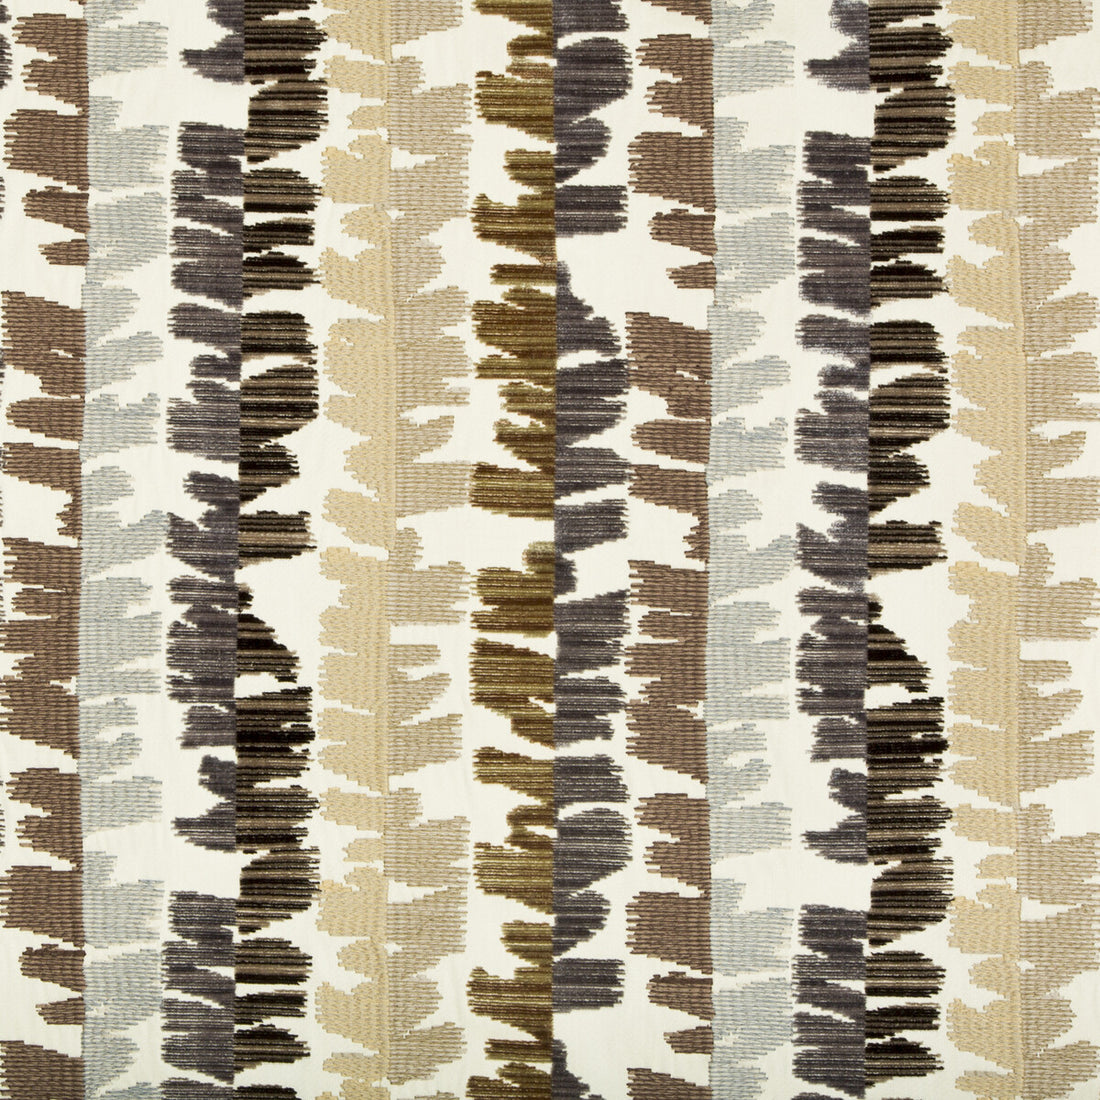 Fractal Velvet fabric in sand/stone color - pattern GWF-3709.1611.0 - by Lee Jofa Modern in the Prism collection